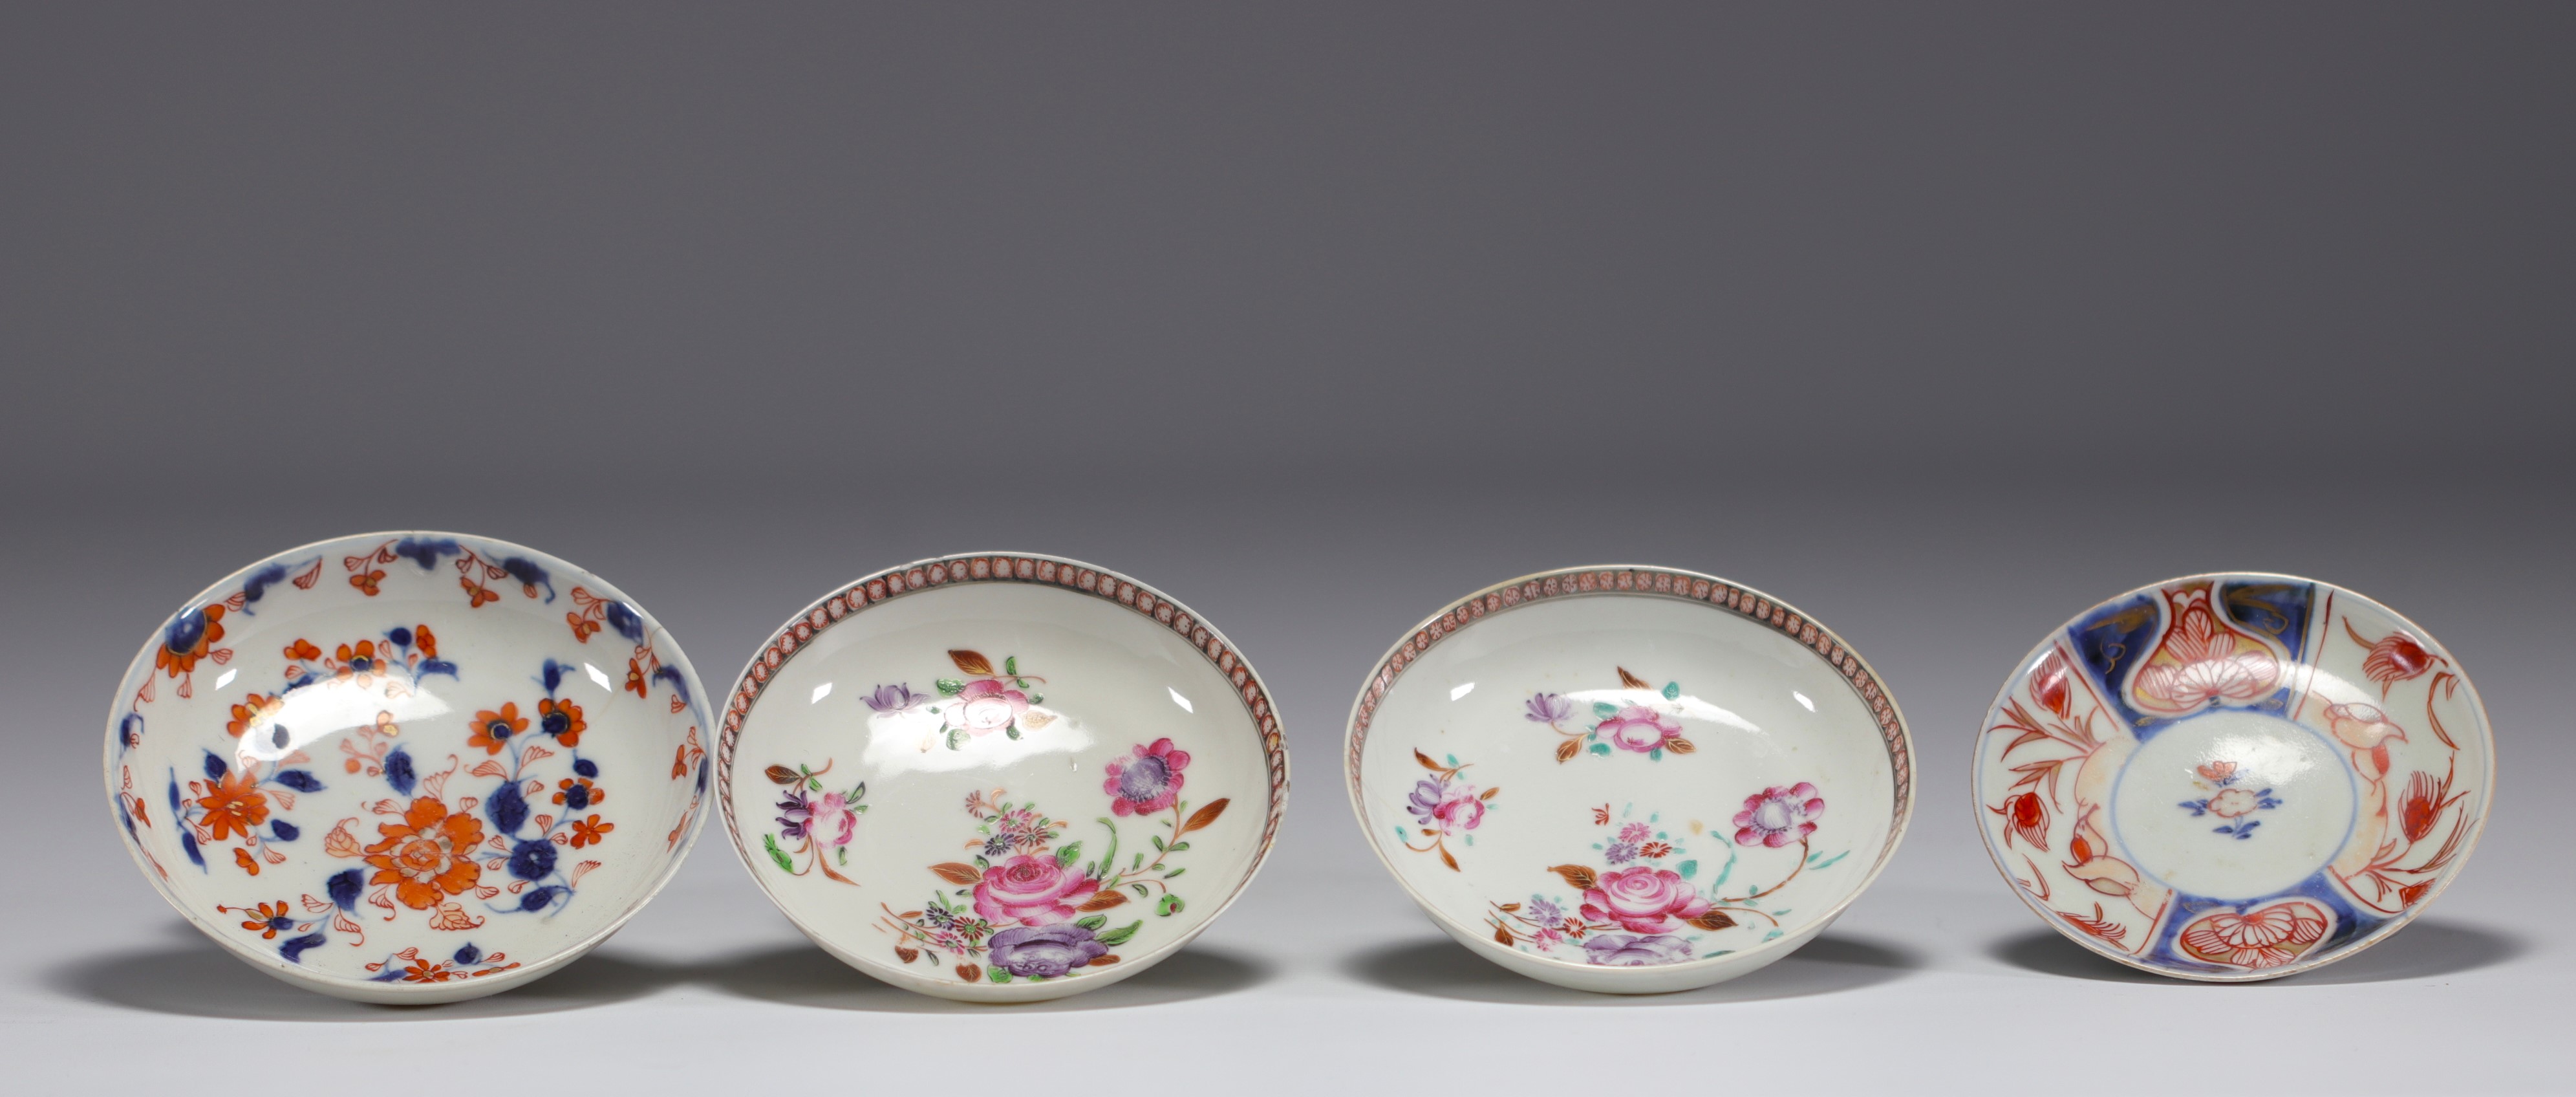 China - Set of various pieces of polychrome porcelain, 18th century. - Image 3 of 4